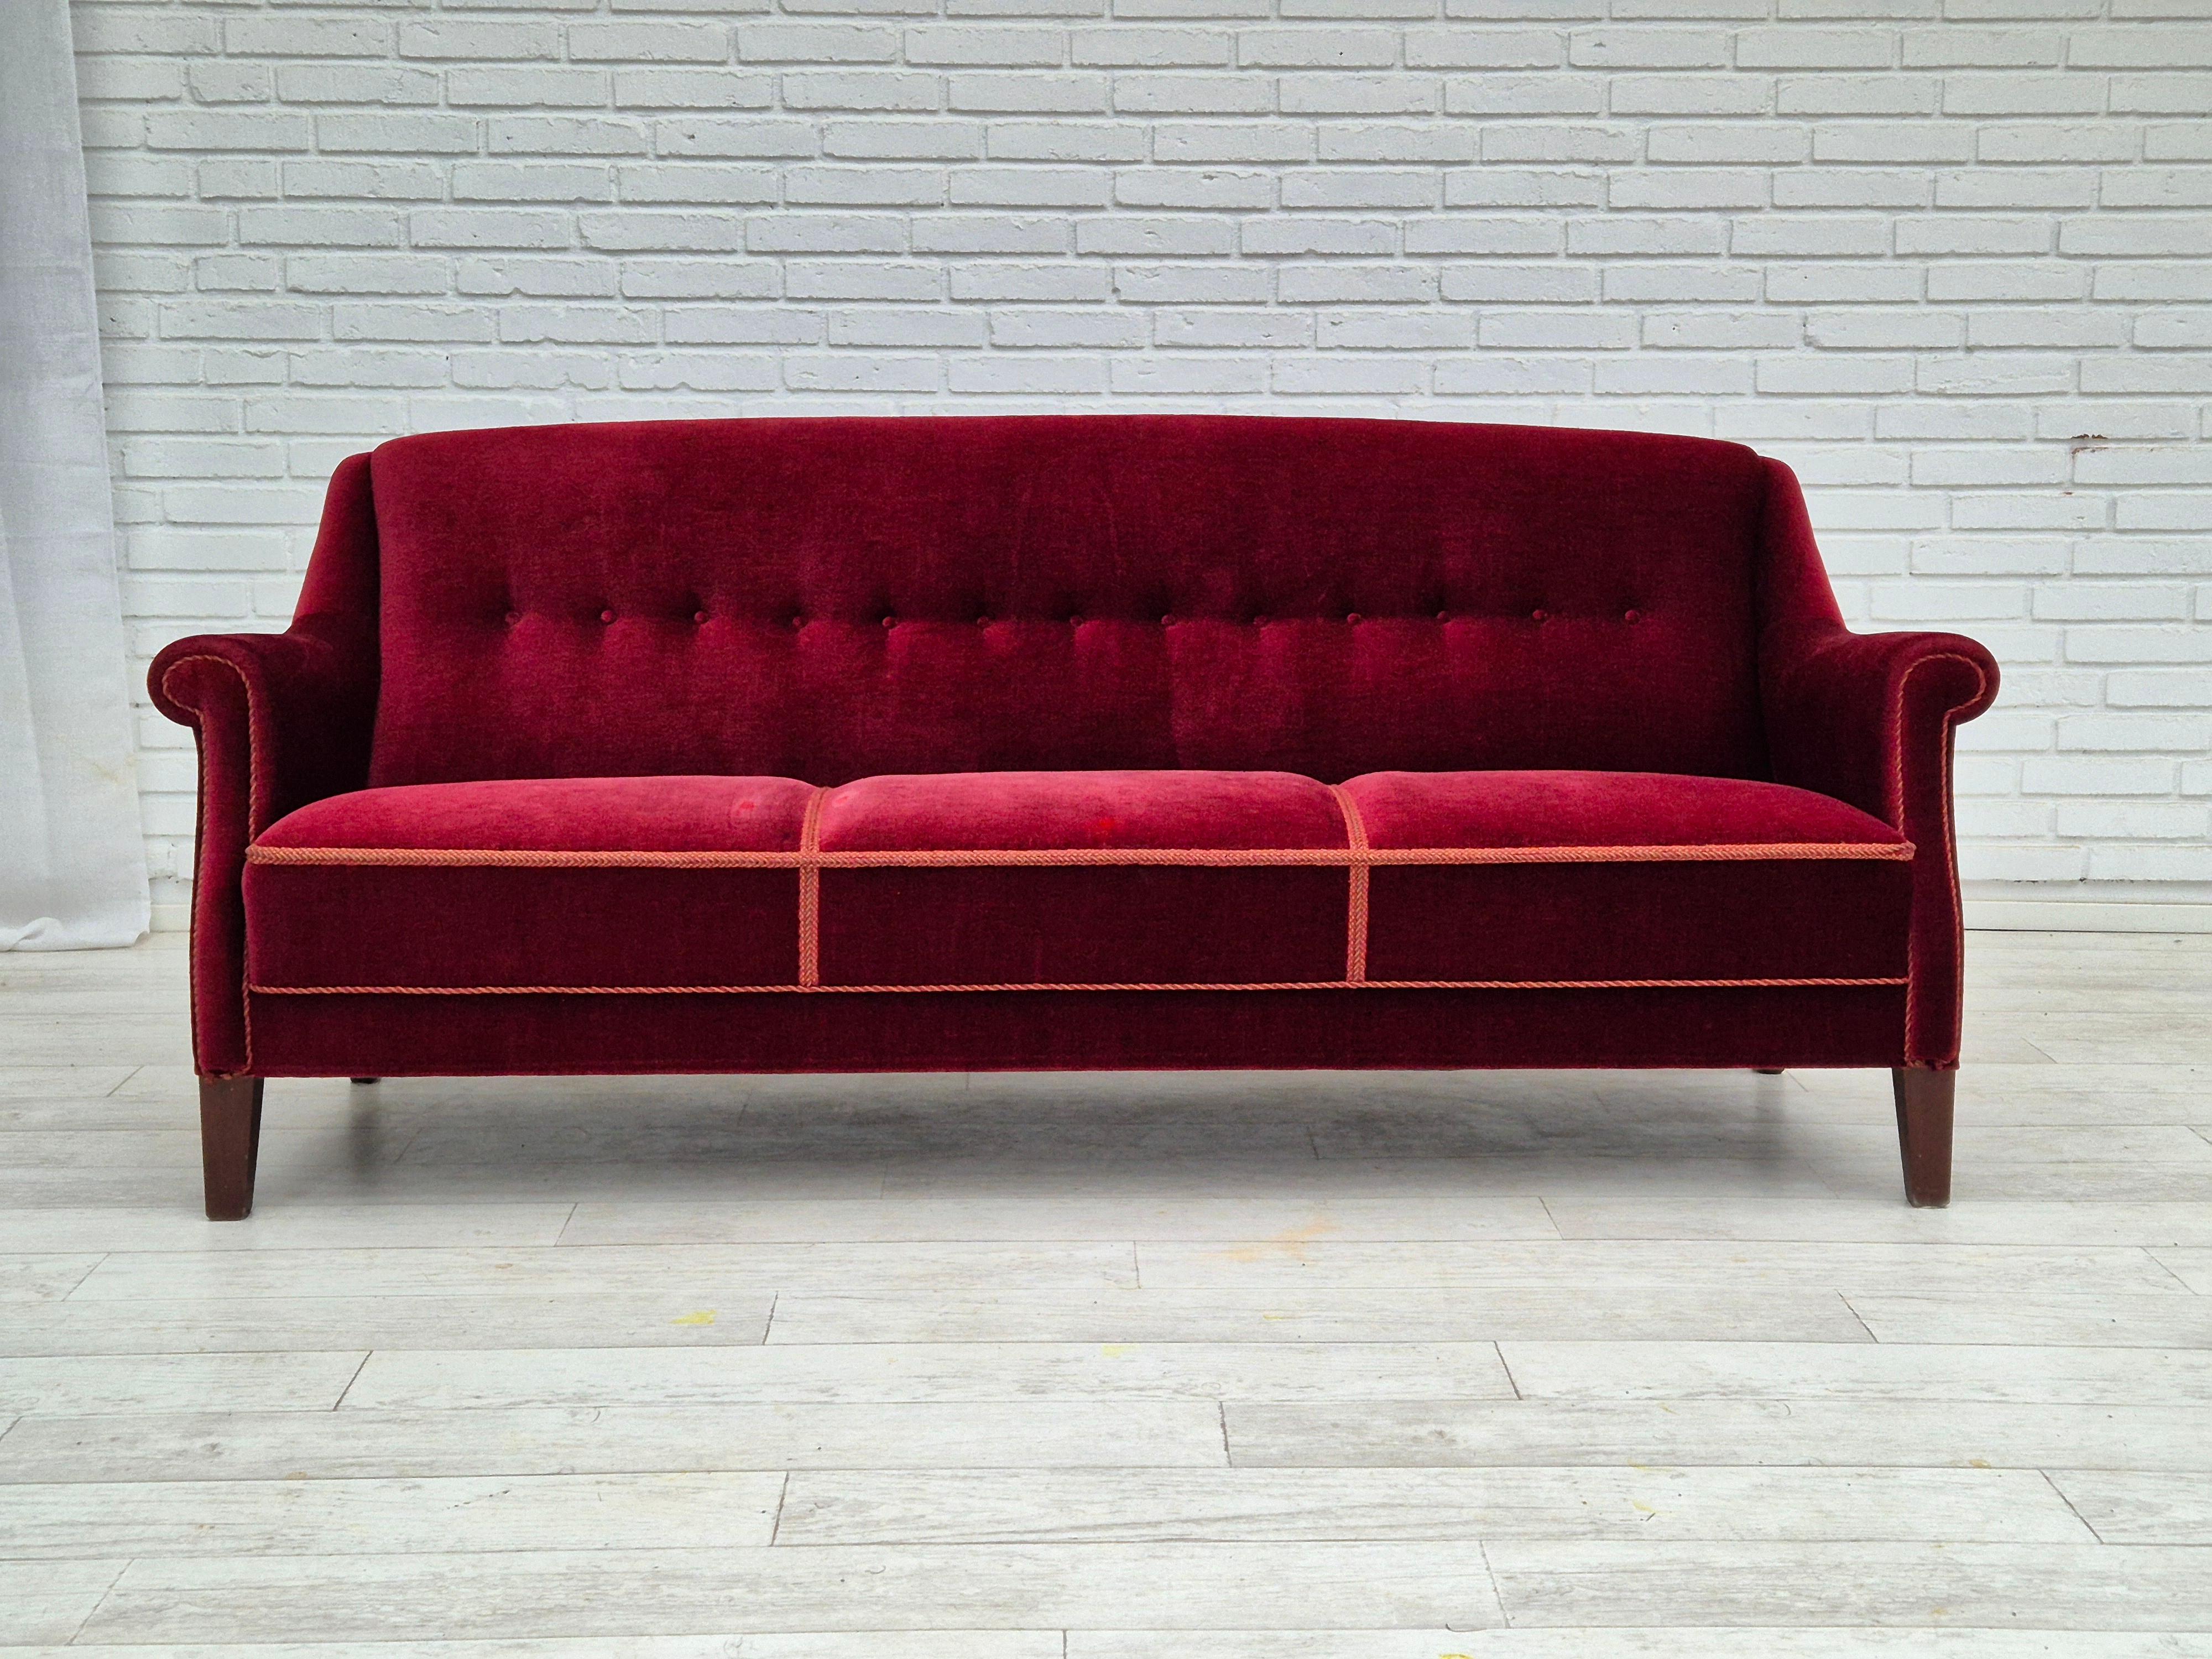 1960s, Danish 3 seater sofa in original good condition. Cherry red furniture velour, beech wood legs, springs in seat. Manufactured by Danish furniture manufacturer in about 1955-60.